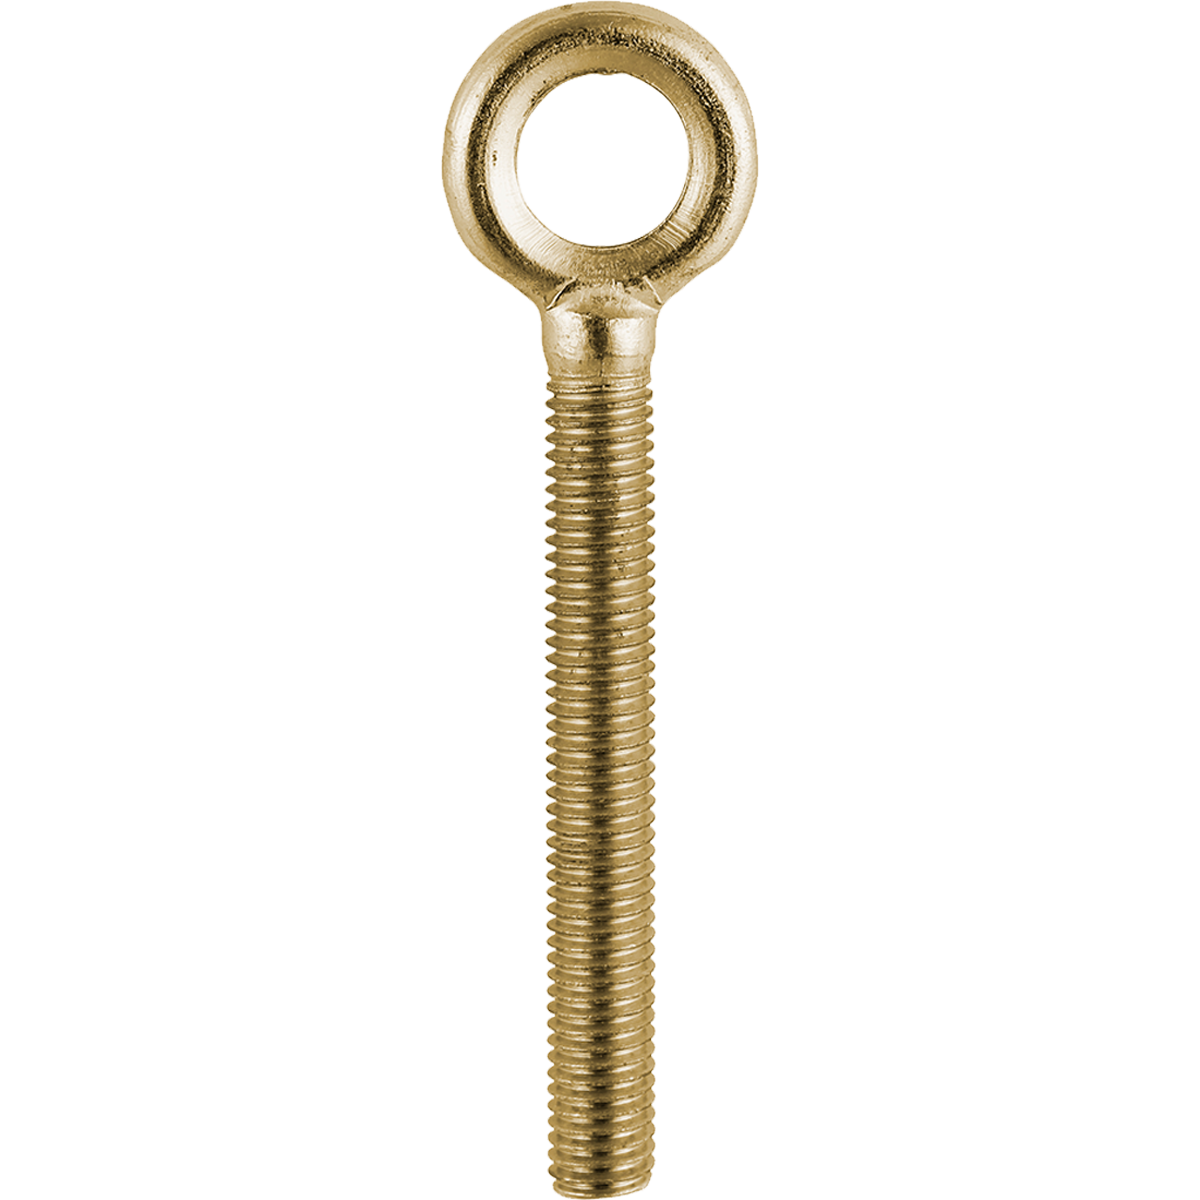 Forged eye bolts, also known as threaded eye bolts at competitive prices.